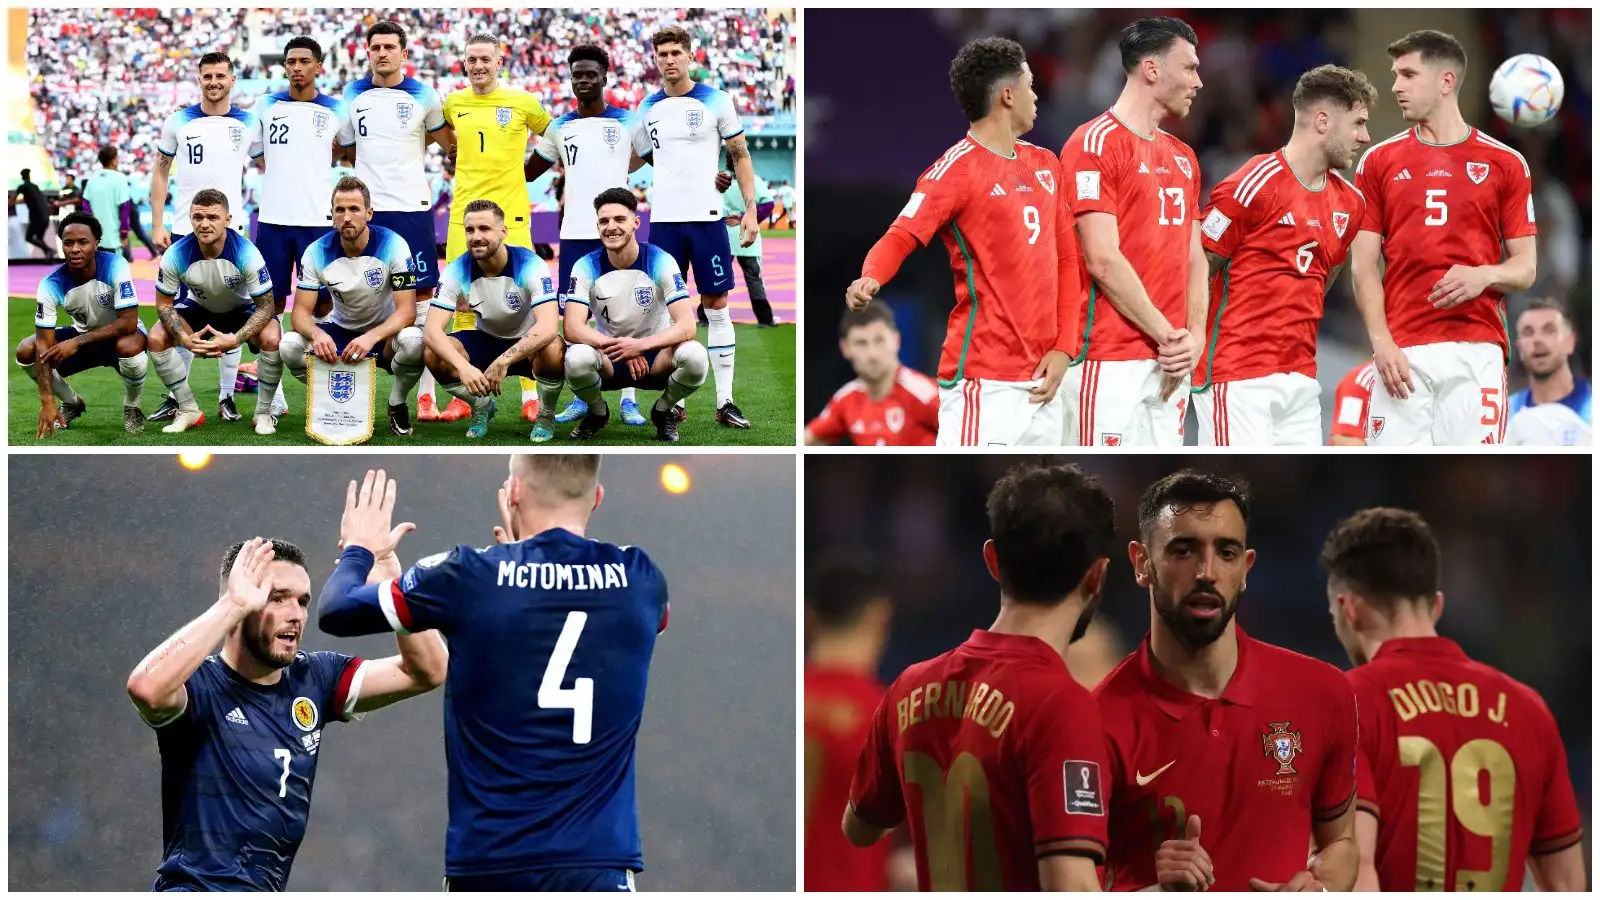 Premier League superstars are in solution for England, Wales, Scotland and Portugal this month.